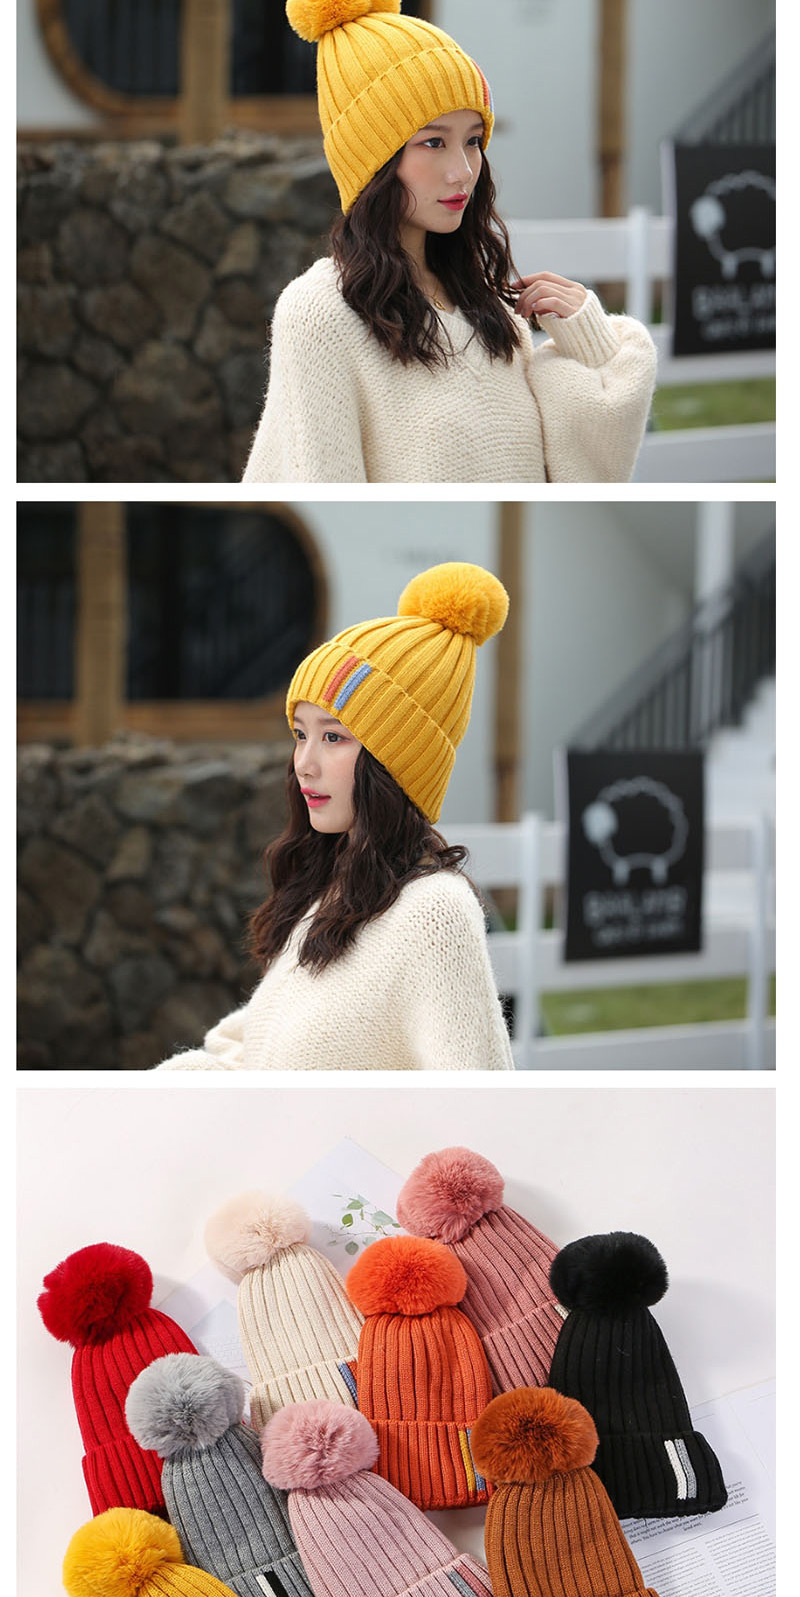 Fashion Lotus Color Contrast Striped Knit Wool Hat,Knitting Wool Hats